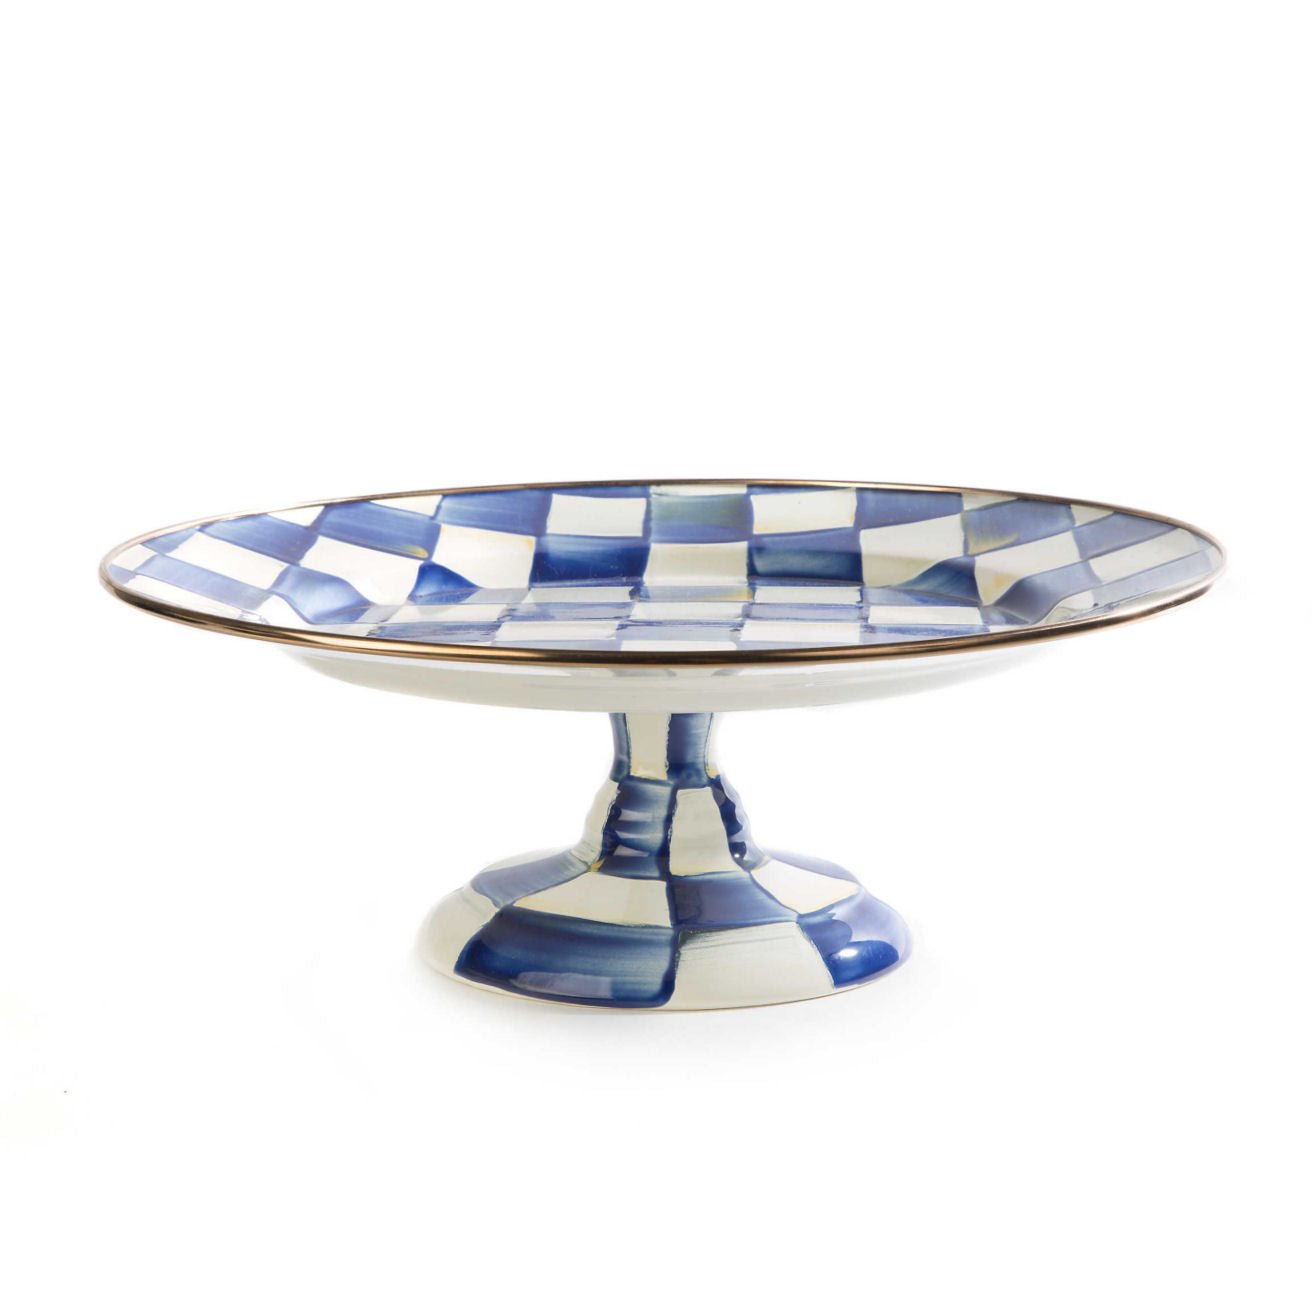 Luxury Royal Check Enamel Dining Pedestal Platter - Small - |VESIMI Design| Luxury and Rustic bathrooms online